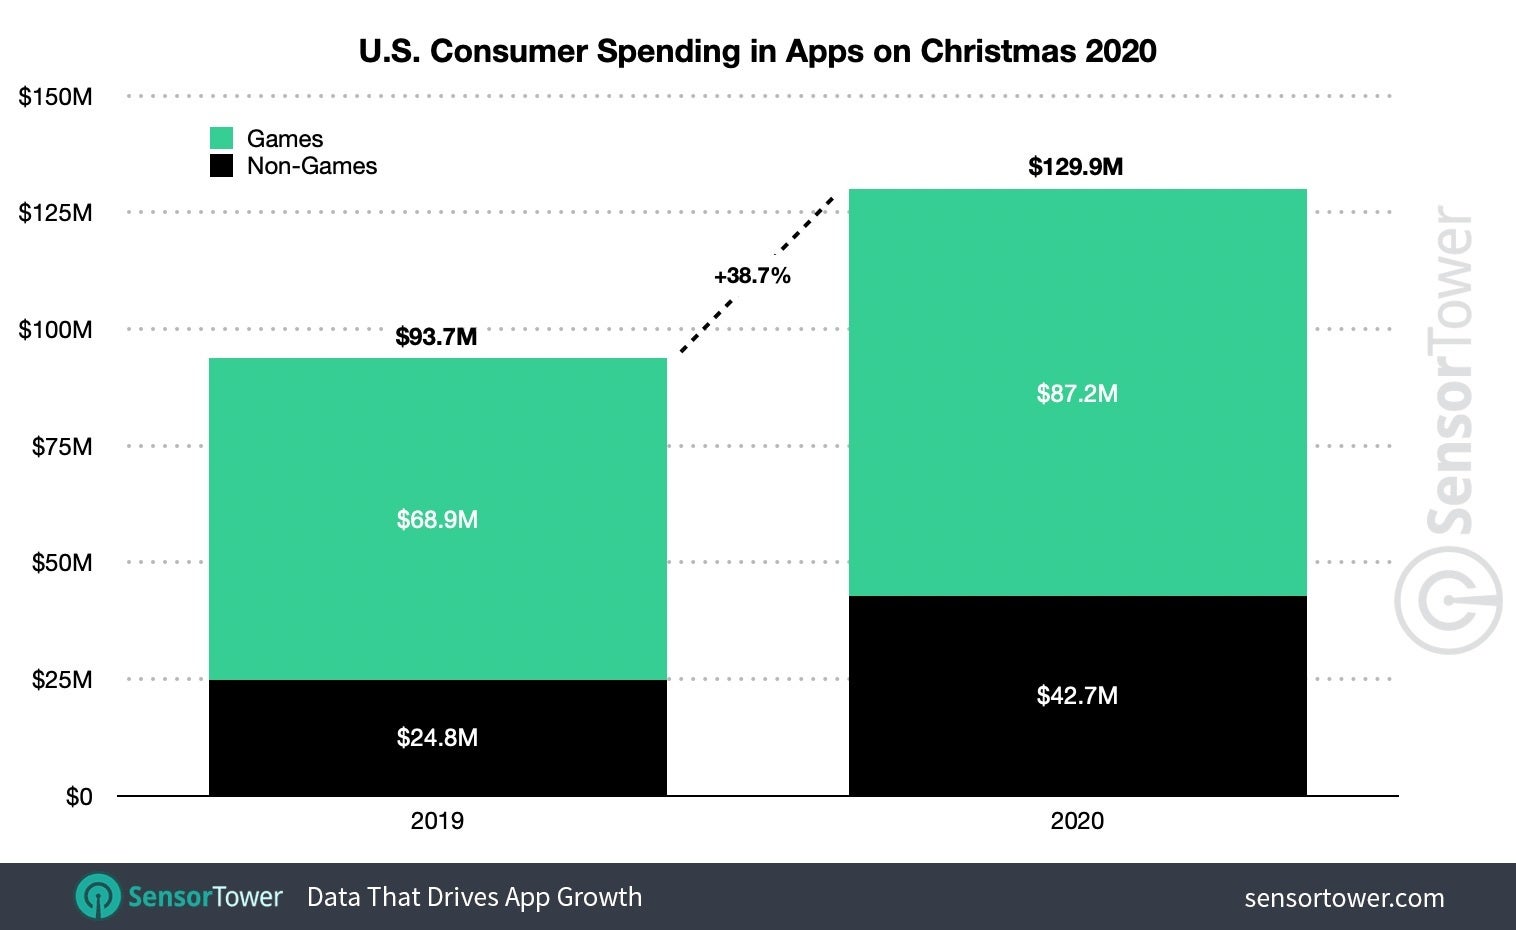 U.S. Consumer Spending in Apps Christmas 2020 - The App Store grabs over 68% of global app revenue on Christmas day